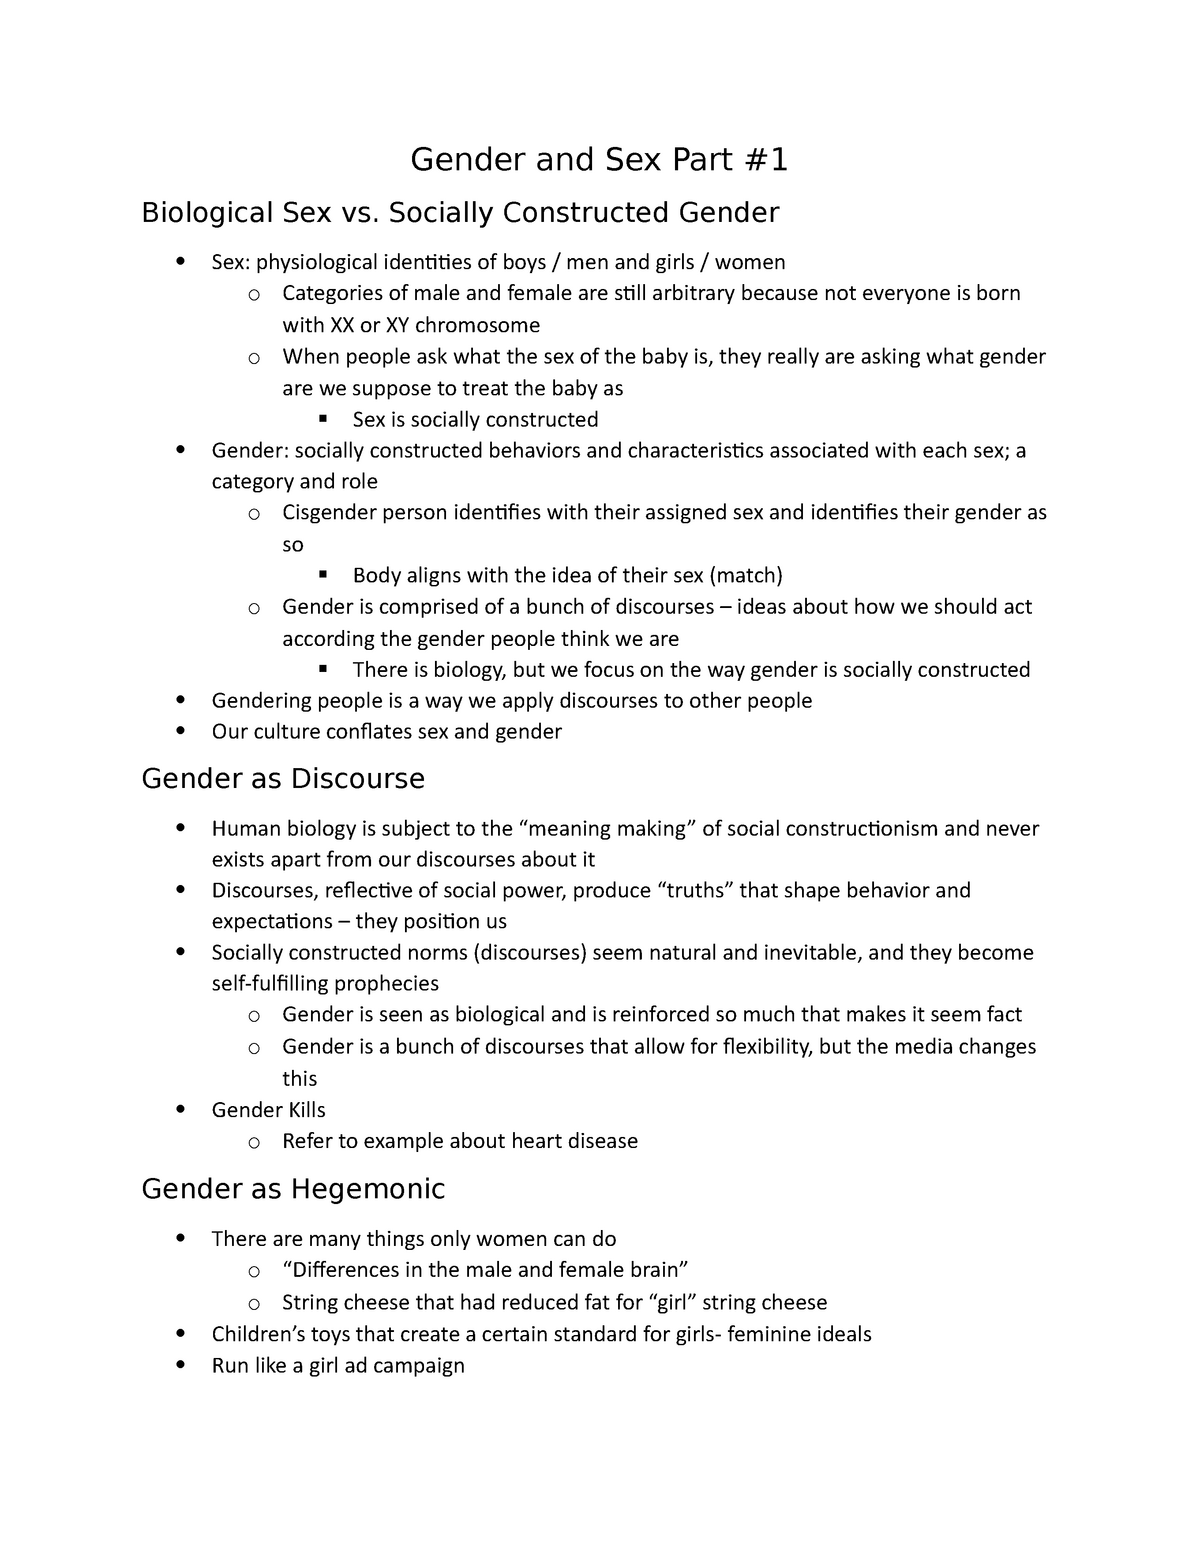 Gender And Sex Part 1 Lecture And Slide Notes Gender And Sex Part Biological Sex Vs Socially 2805